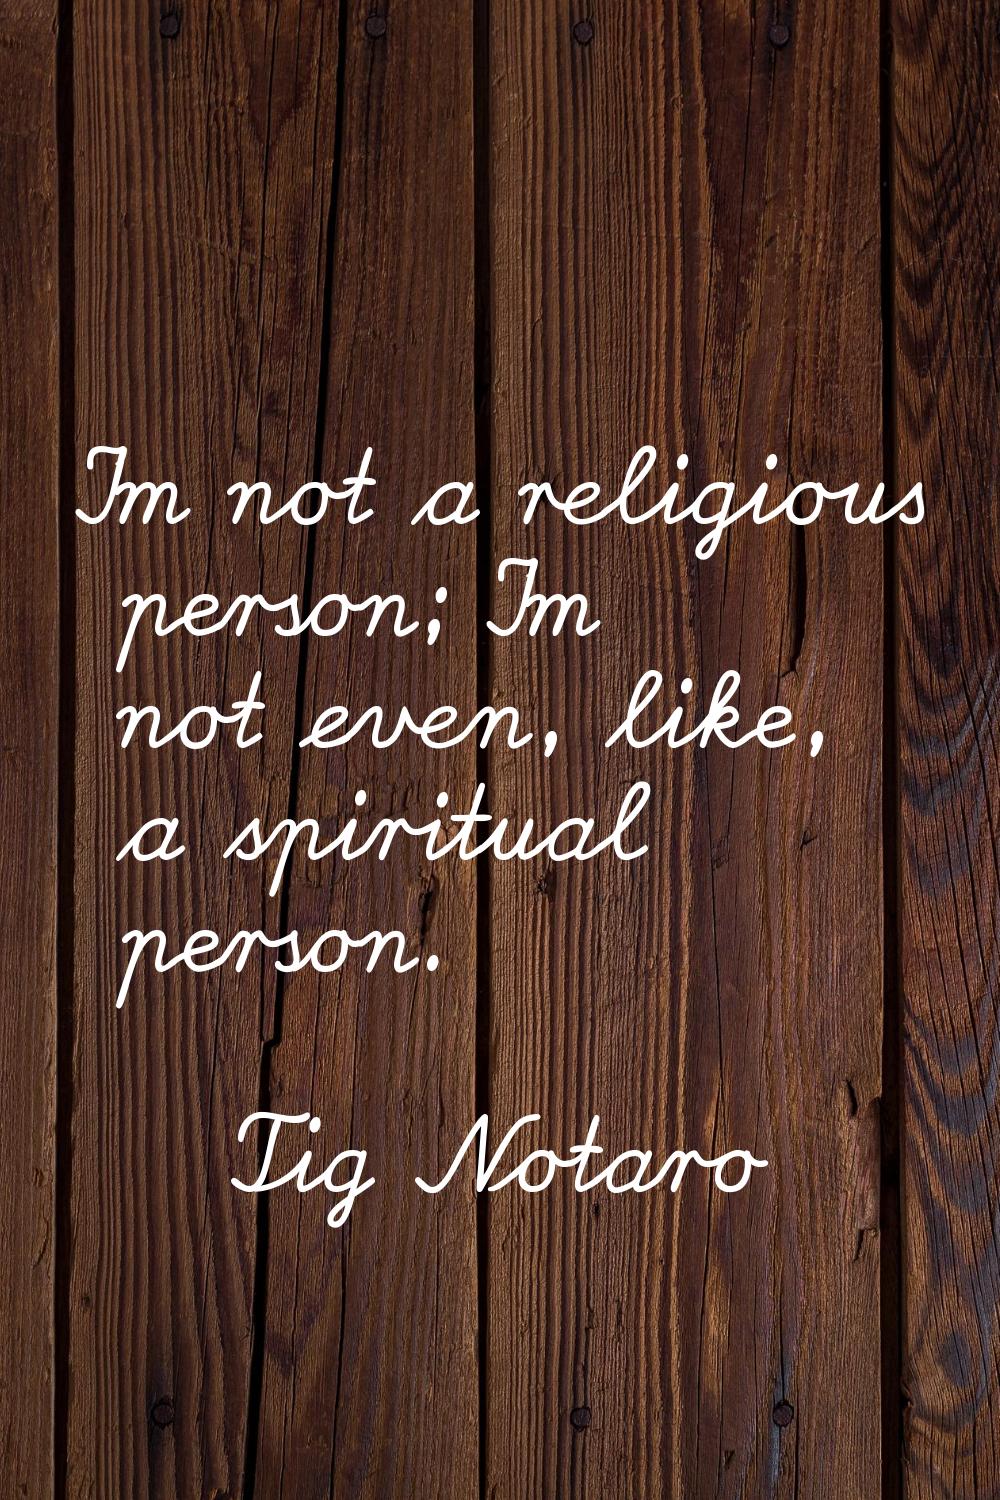 I'm not a religious person; I'm not even, like, a spiritual person.